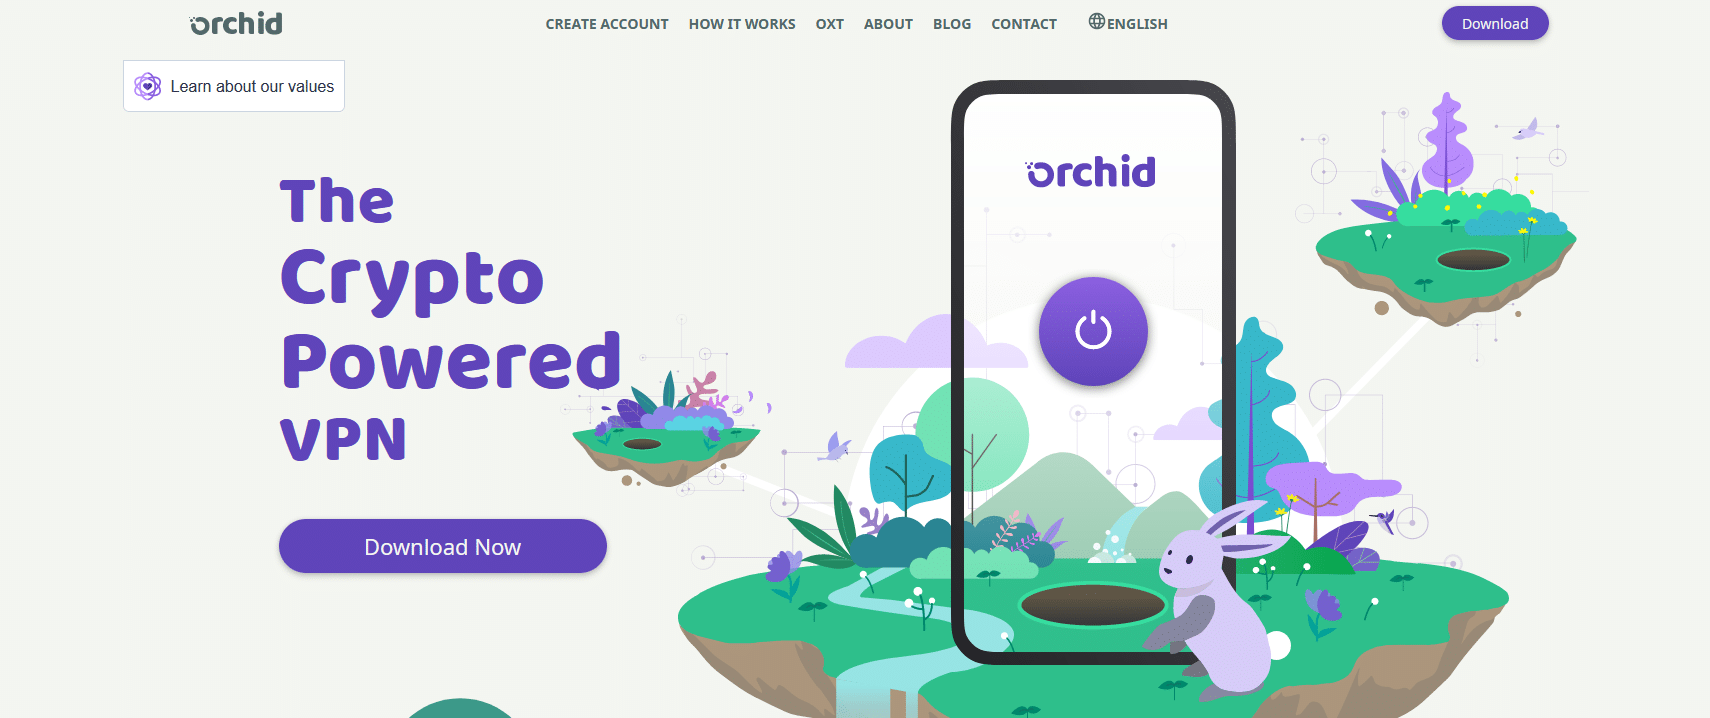 Orchid Protocol kaufen